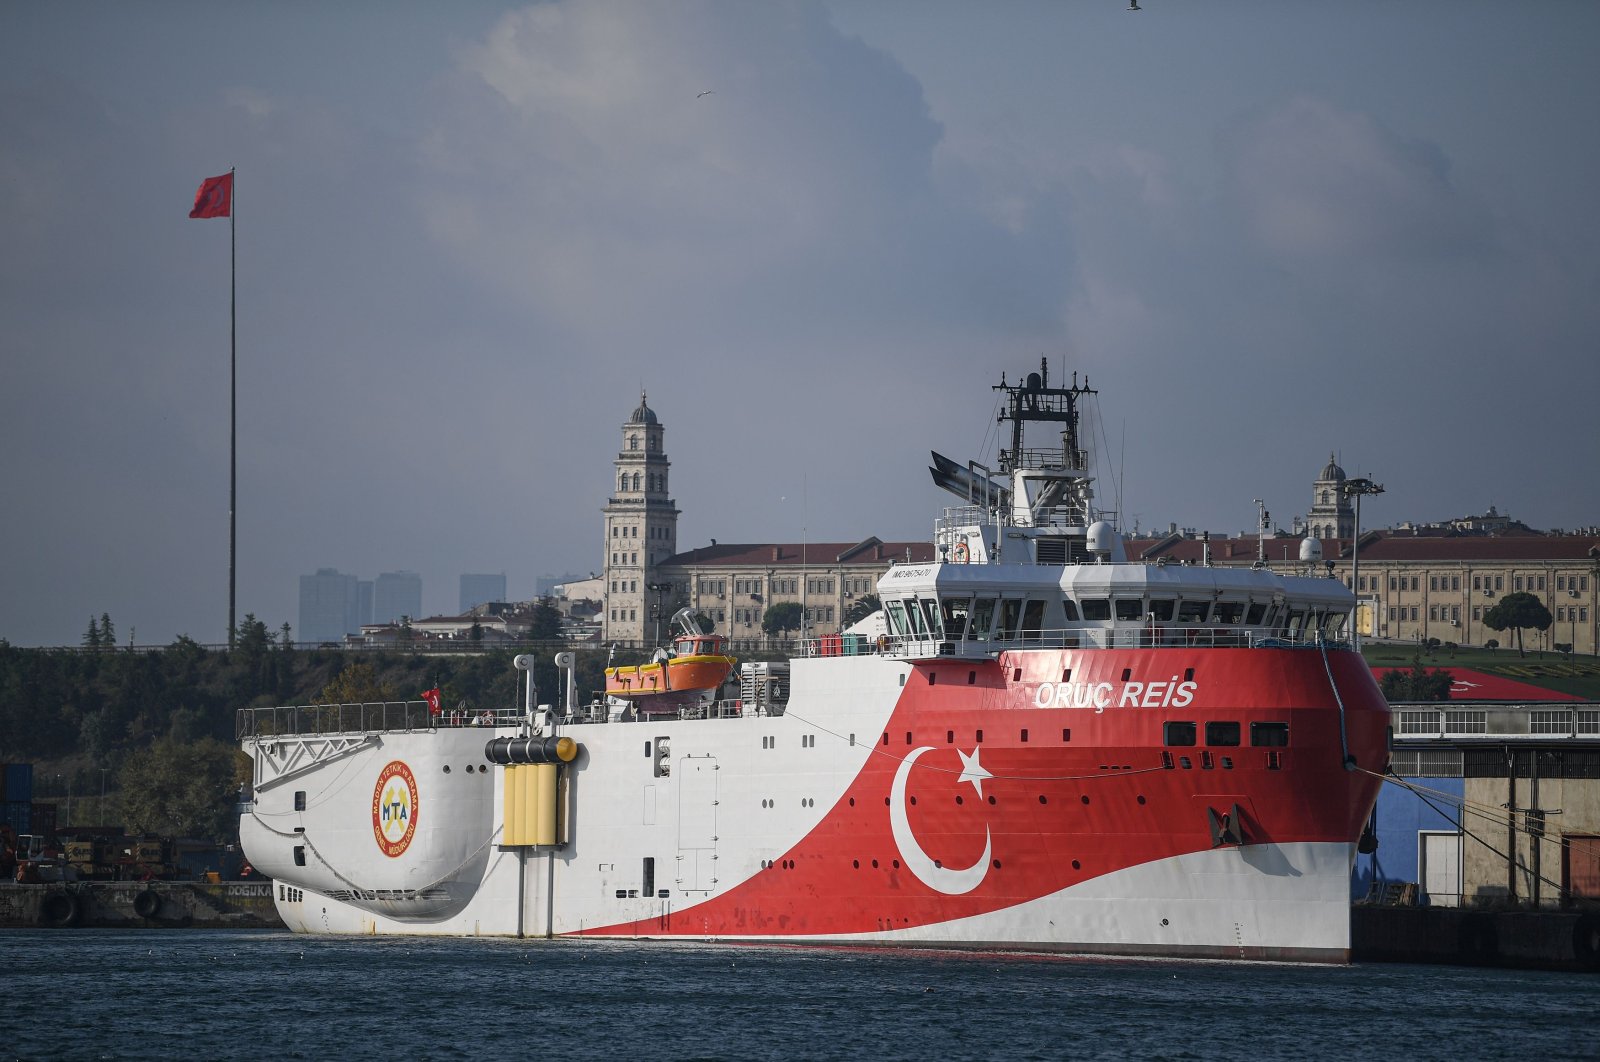 A view of Turkish General Directorate of Mineral Research and Exploration's (MTA) Oruç Reis seismic research vessel docked at Haydarpaşa port, Istanbul on Aug. 23, 2019. (AFP Photo)